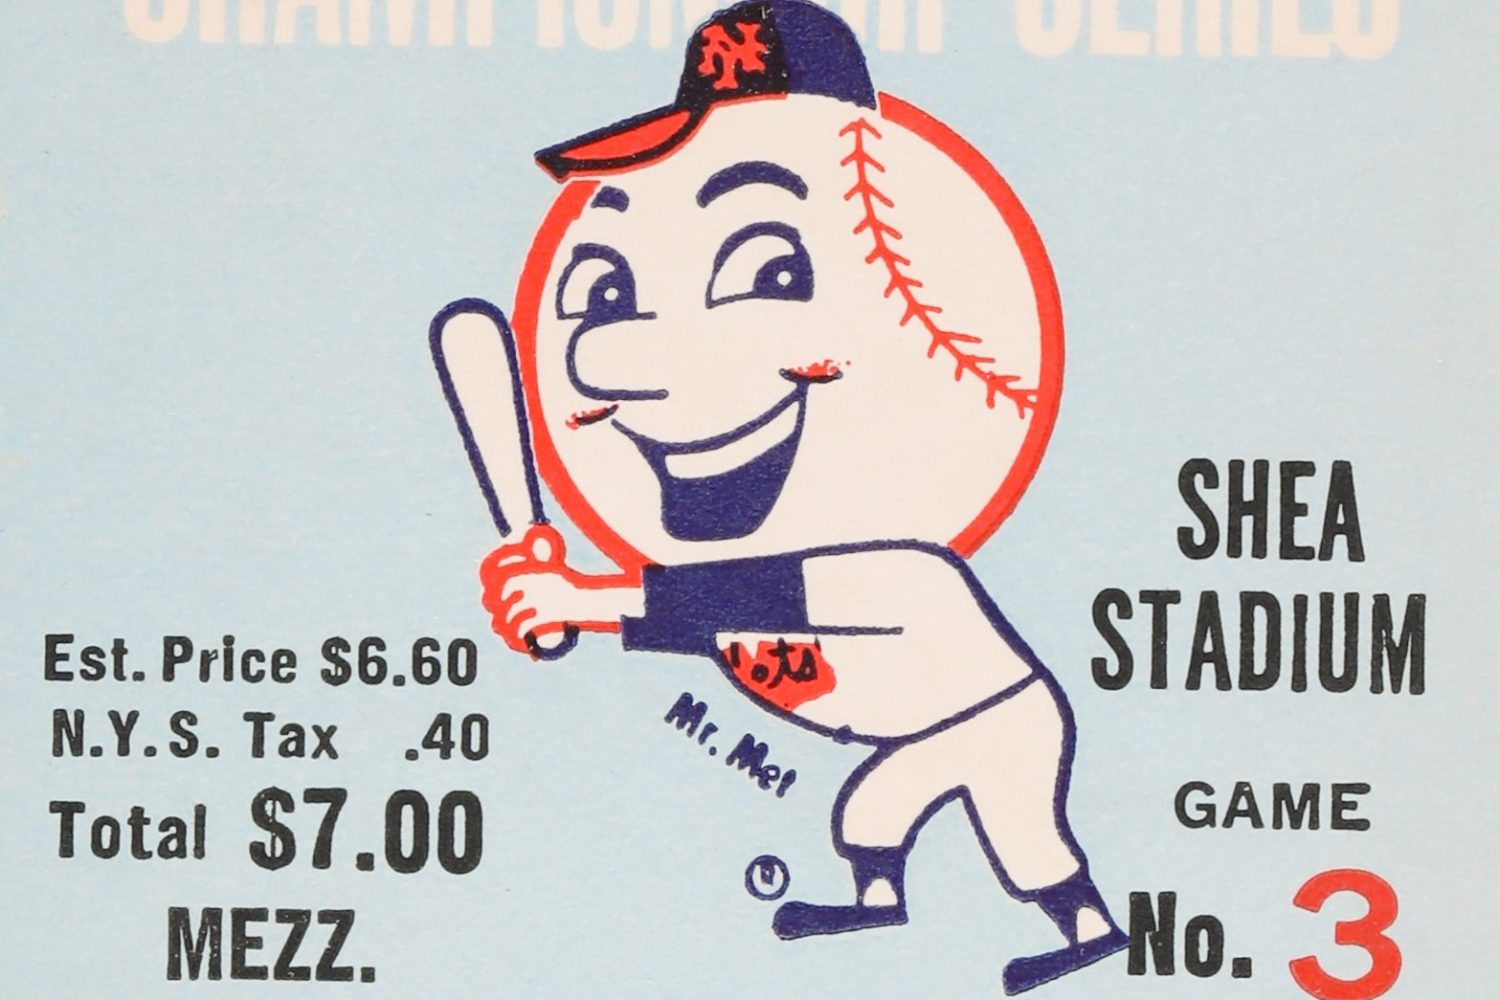 Ticket from Game 3 of the 1969 NLCS